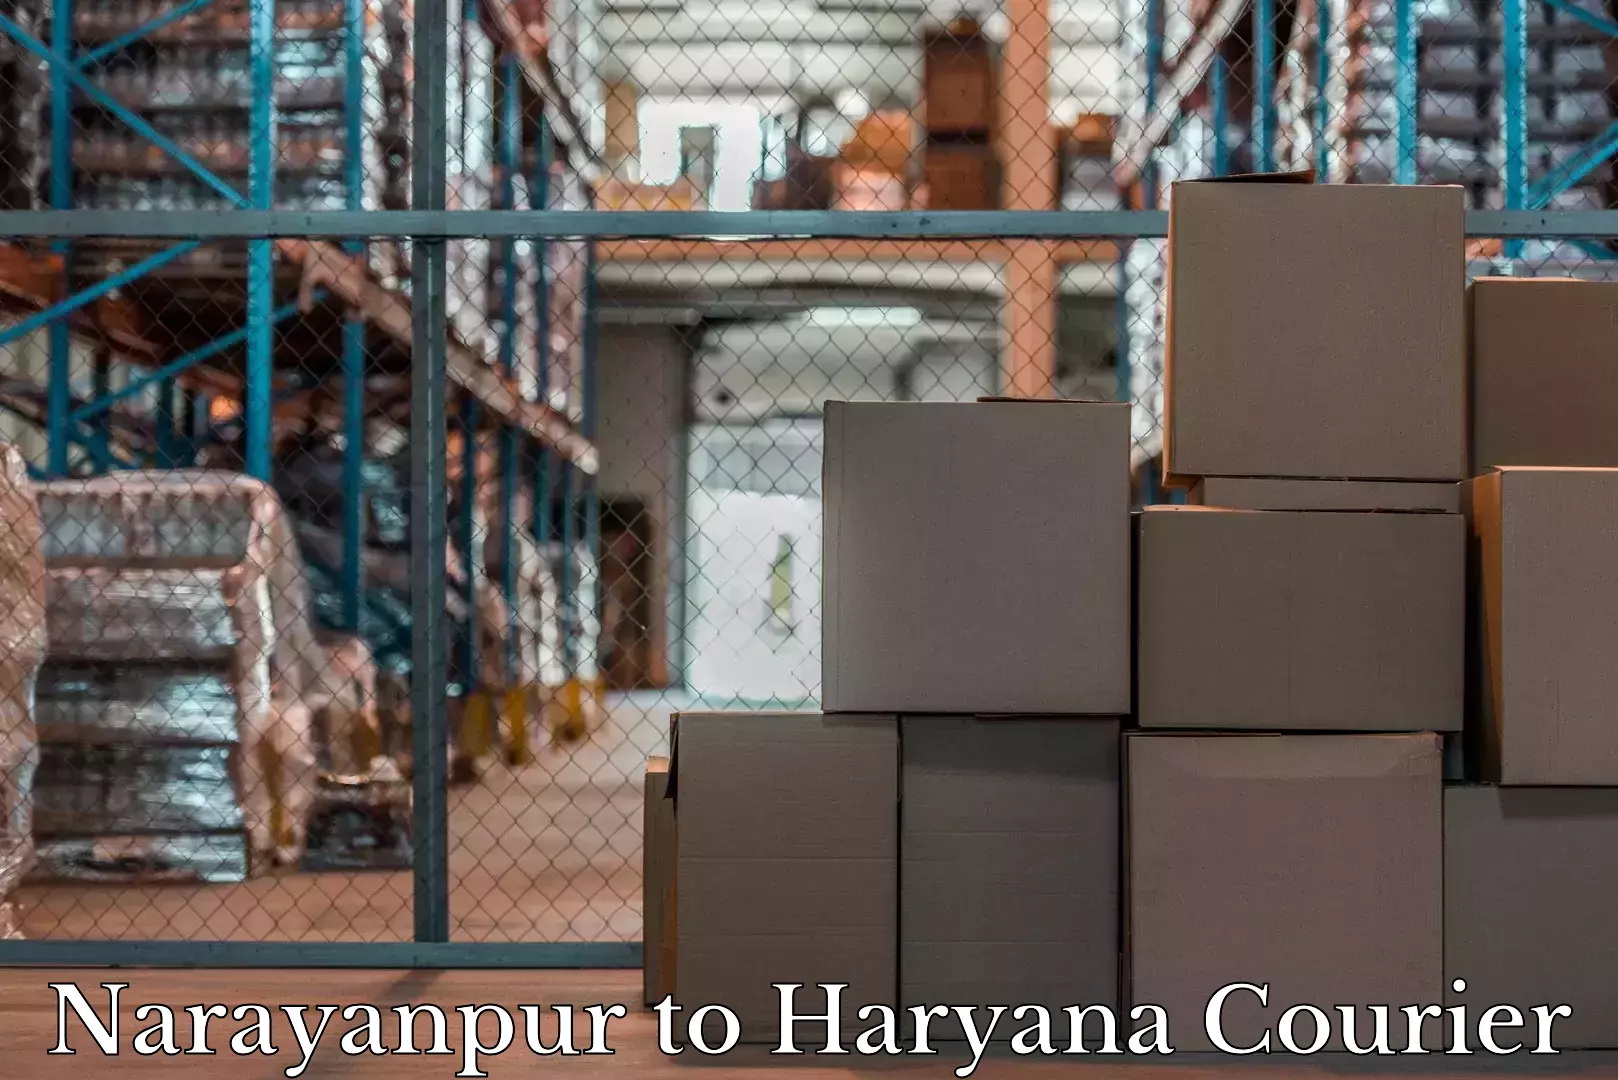 Baggage transport professionals Narayanpur to Sonipat